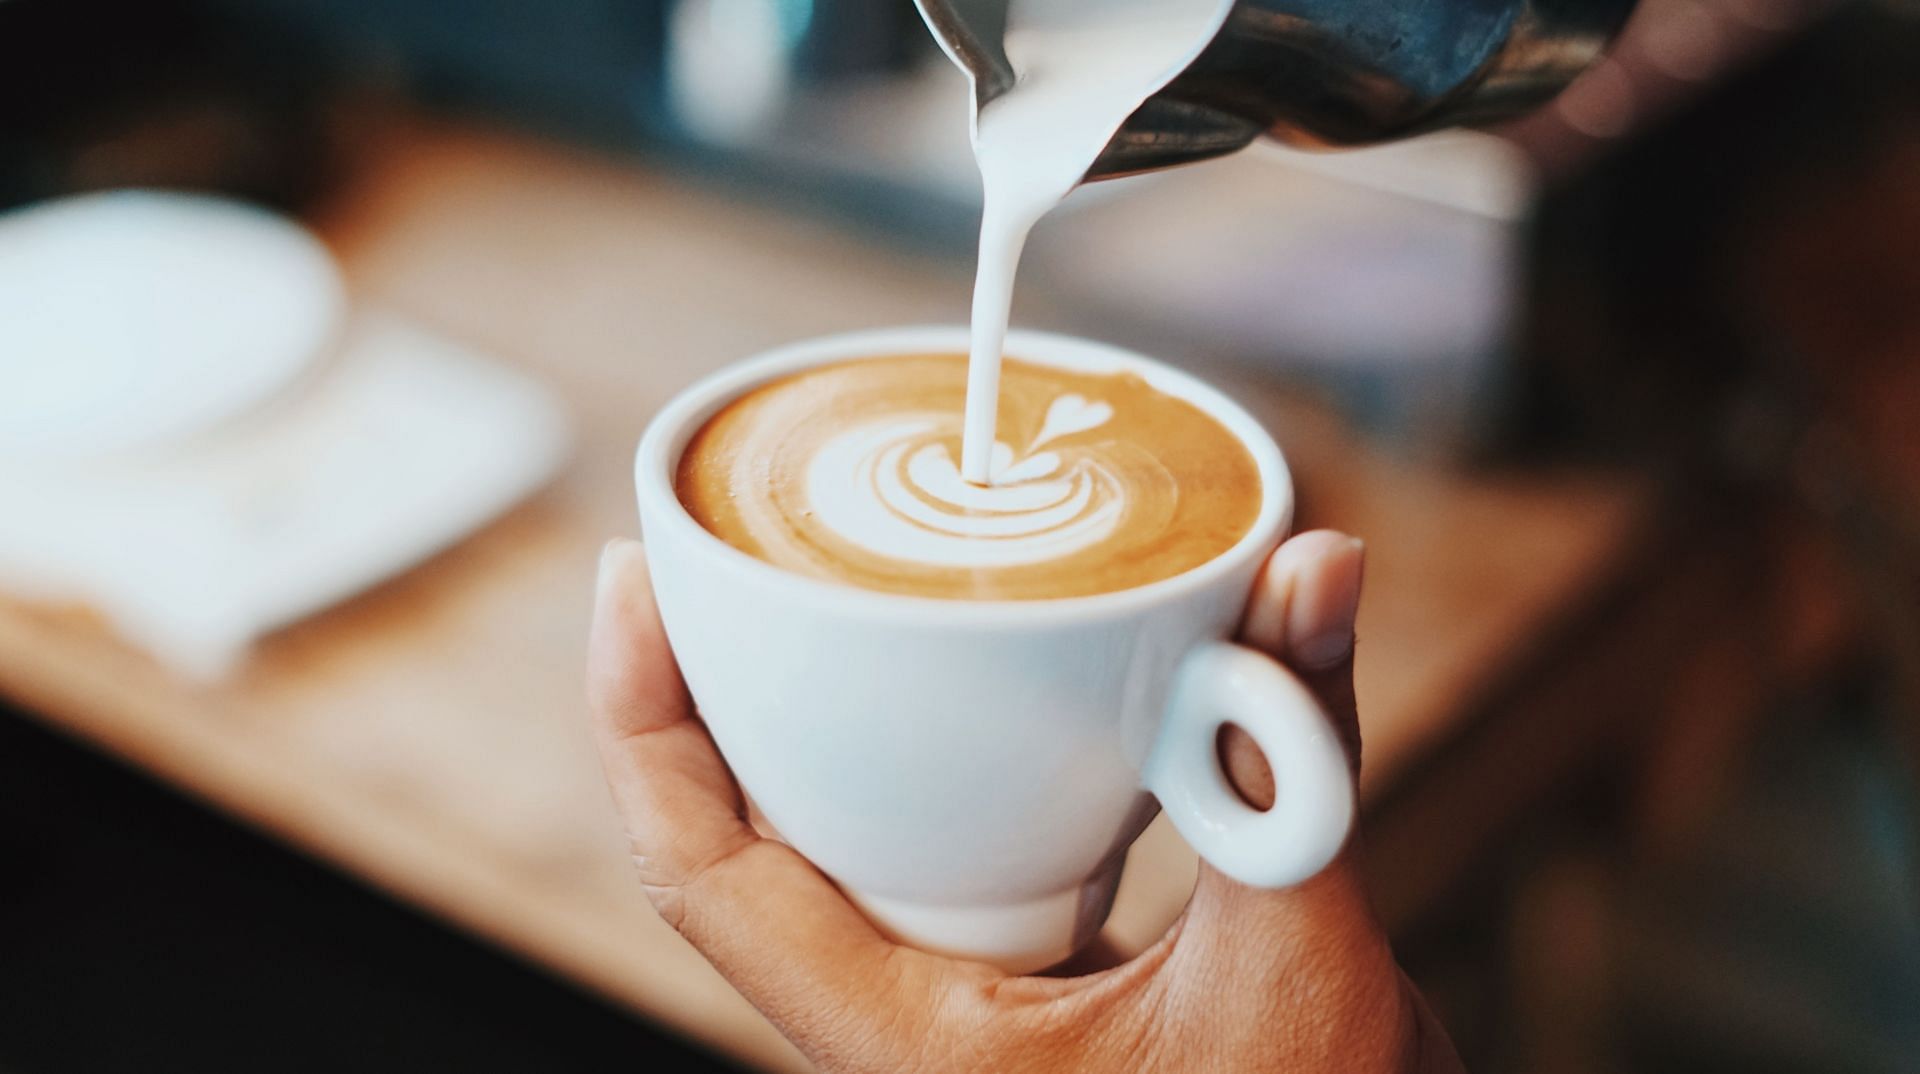 Coffee in Faked foods in the world (Image via Unsplash/Fahmi)